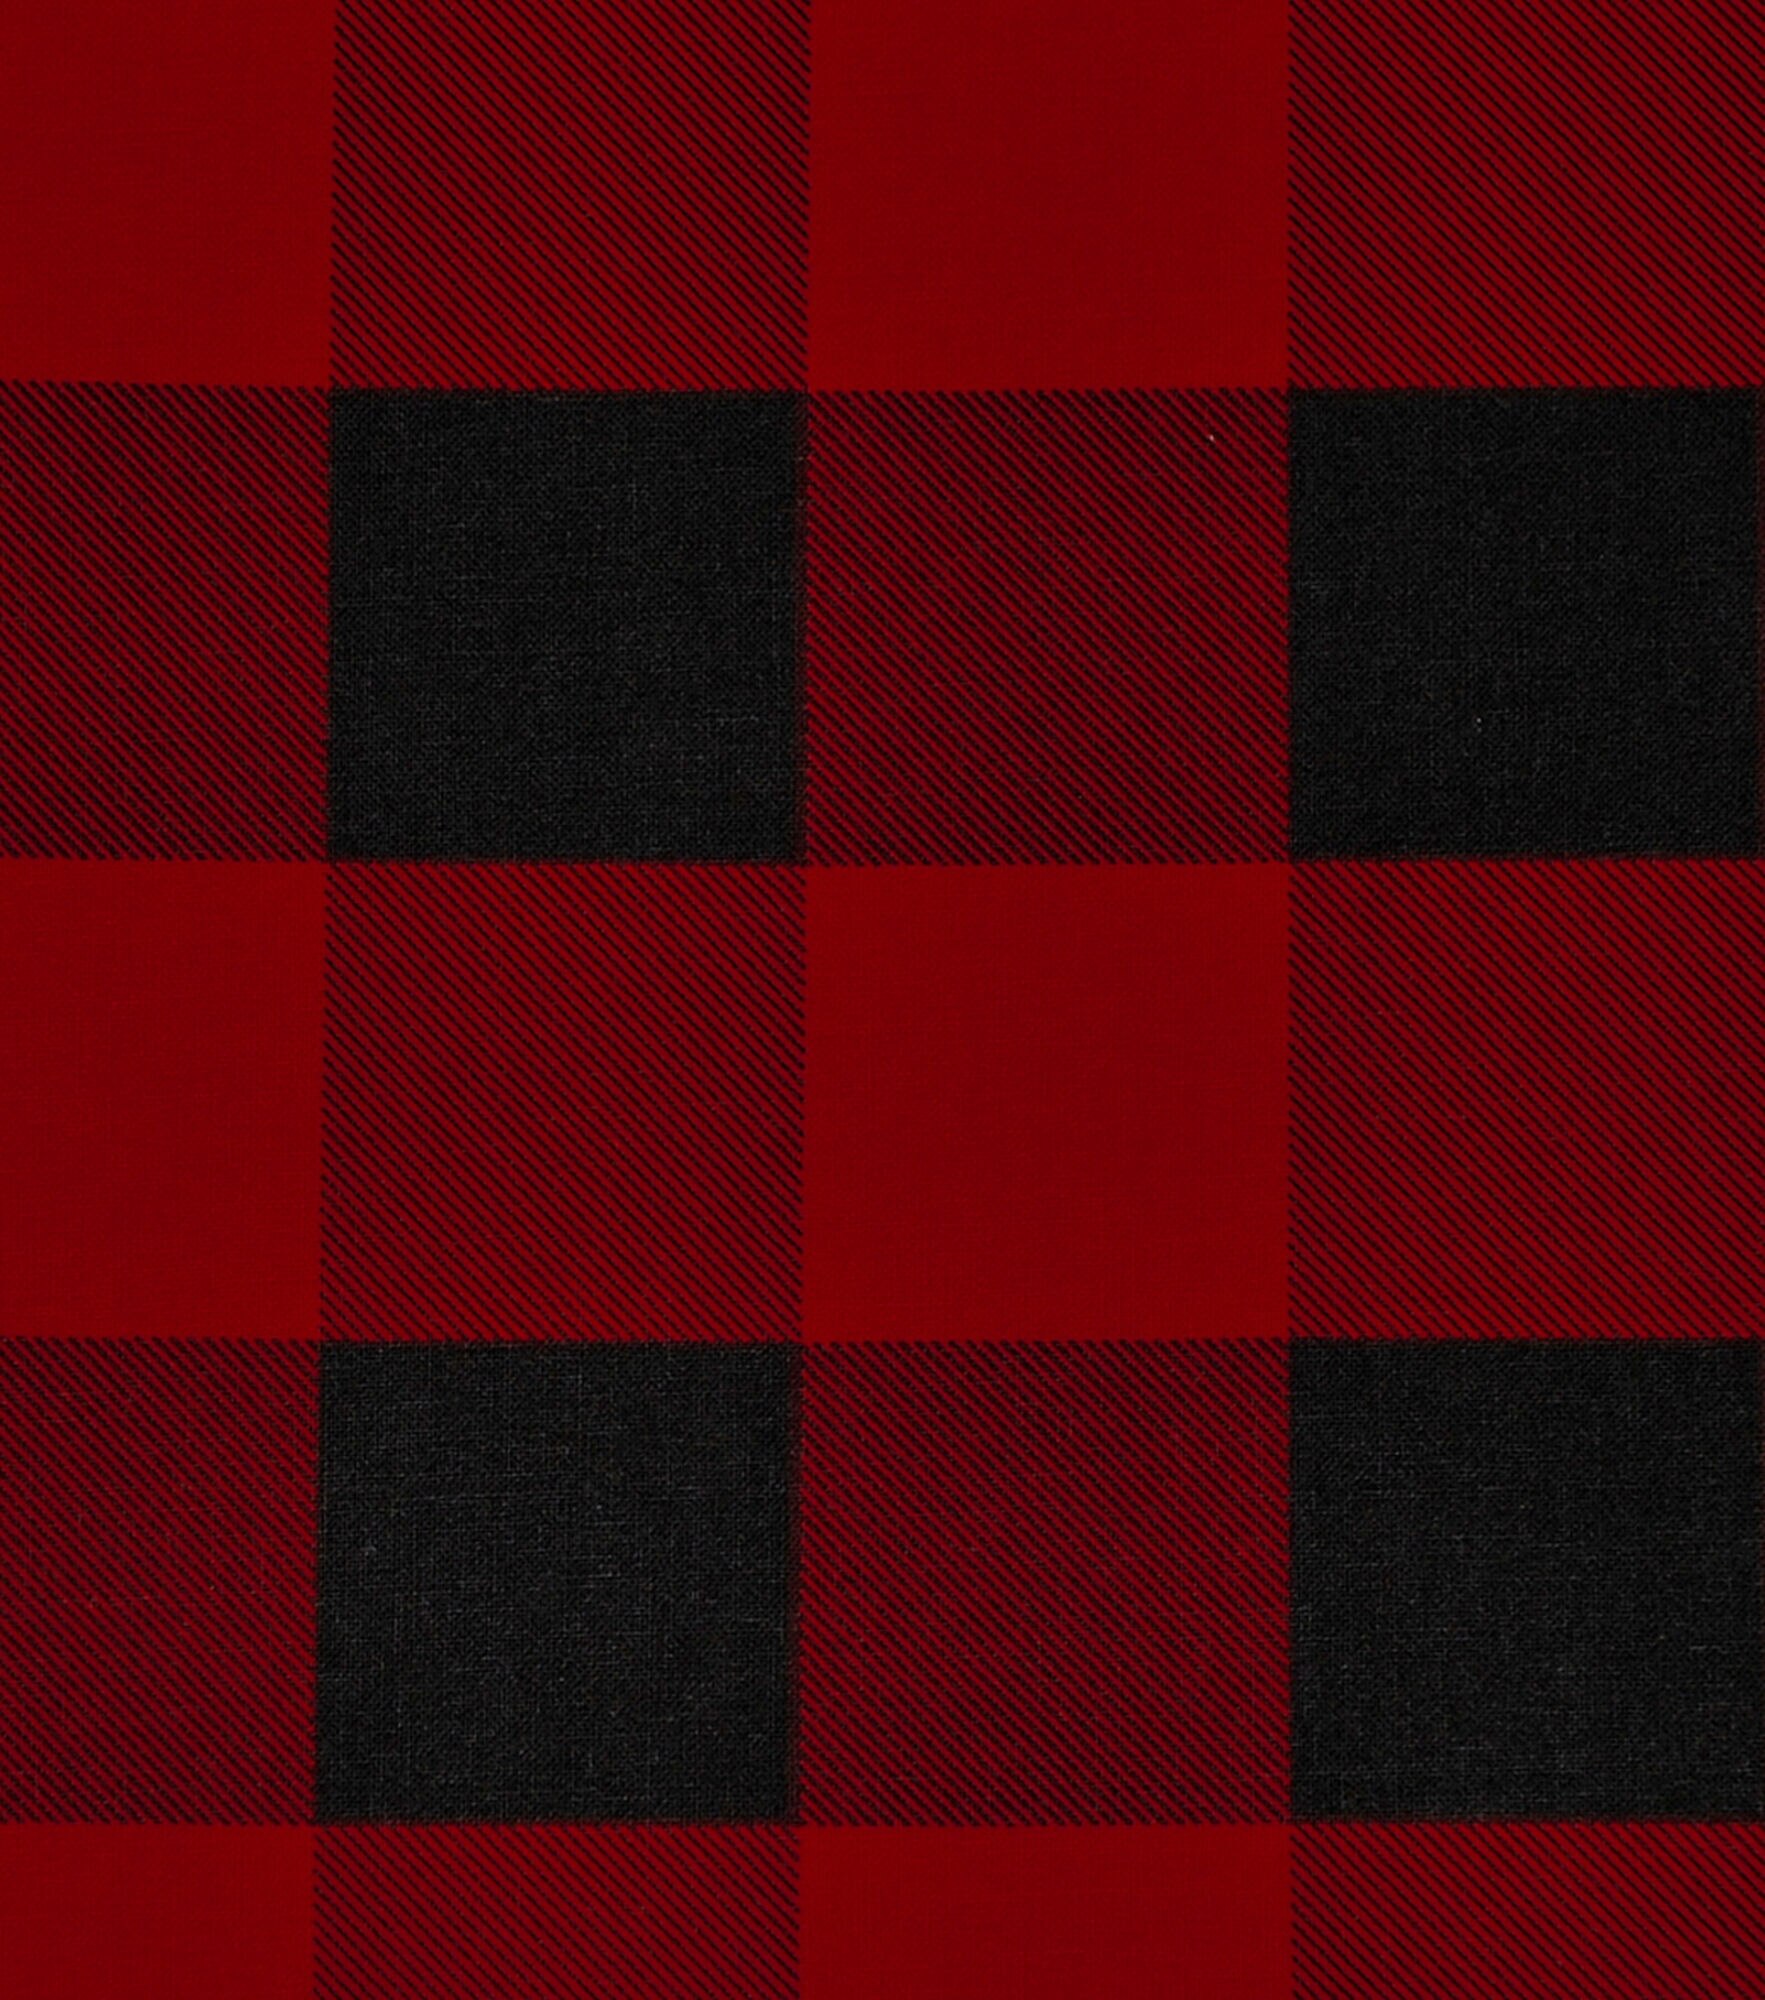 Cotton Buffalo Plaid Checkered Check Plaid Holly Jolly Christmas Winter Red  and Black Cotton Fabric Print by the Yard (49803-Black/Red)